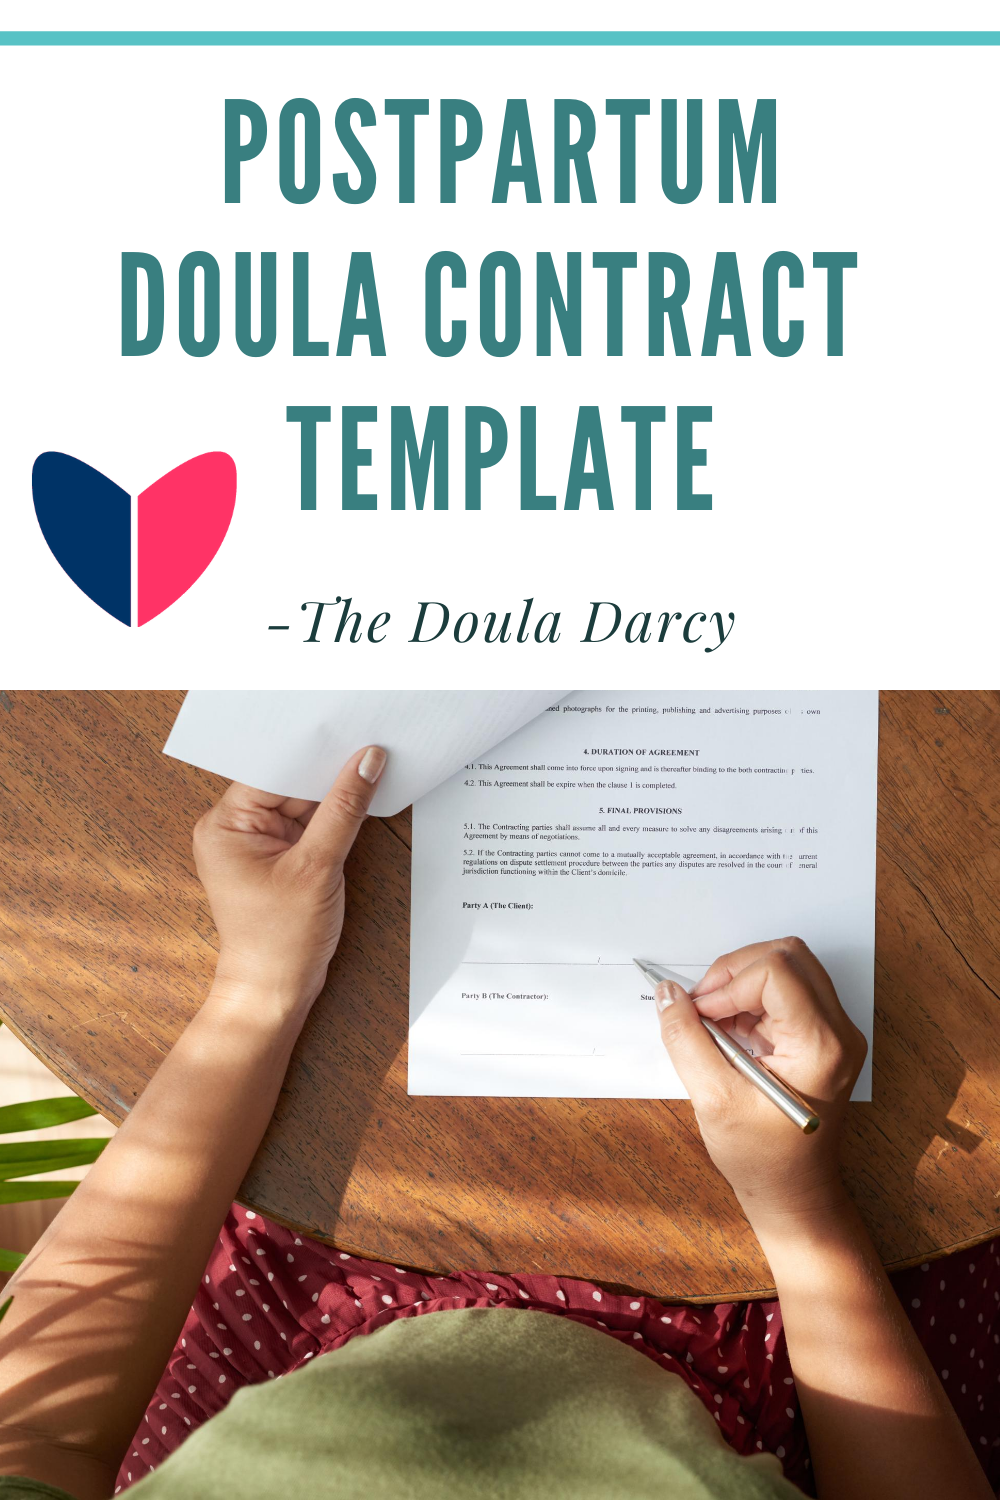 postpartum-doula-contract-template-the-doula-darcy